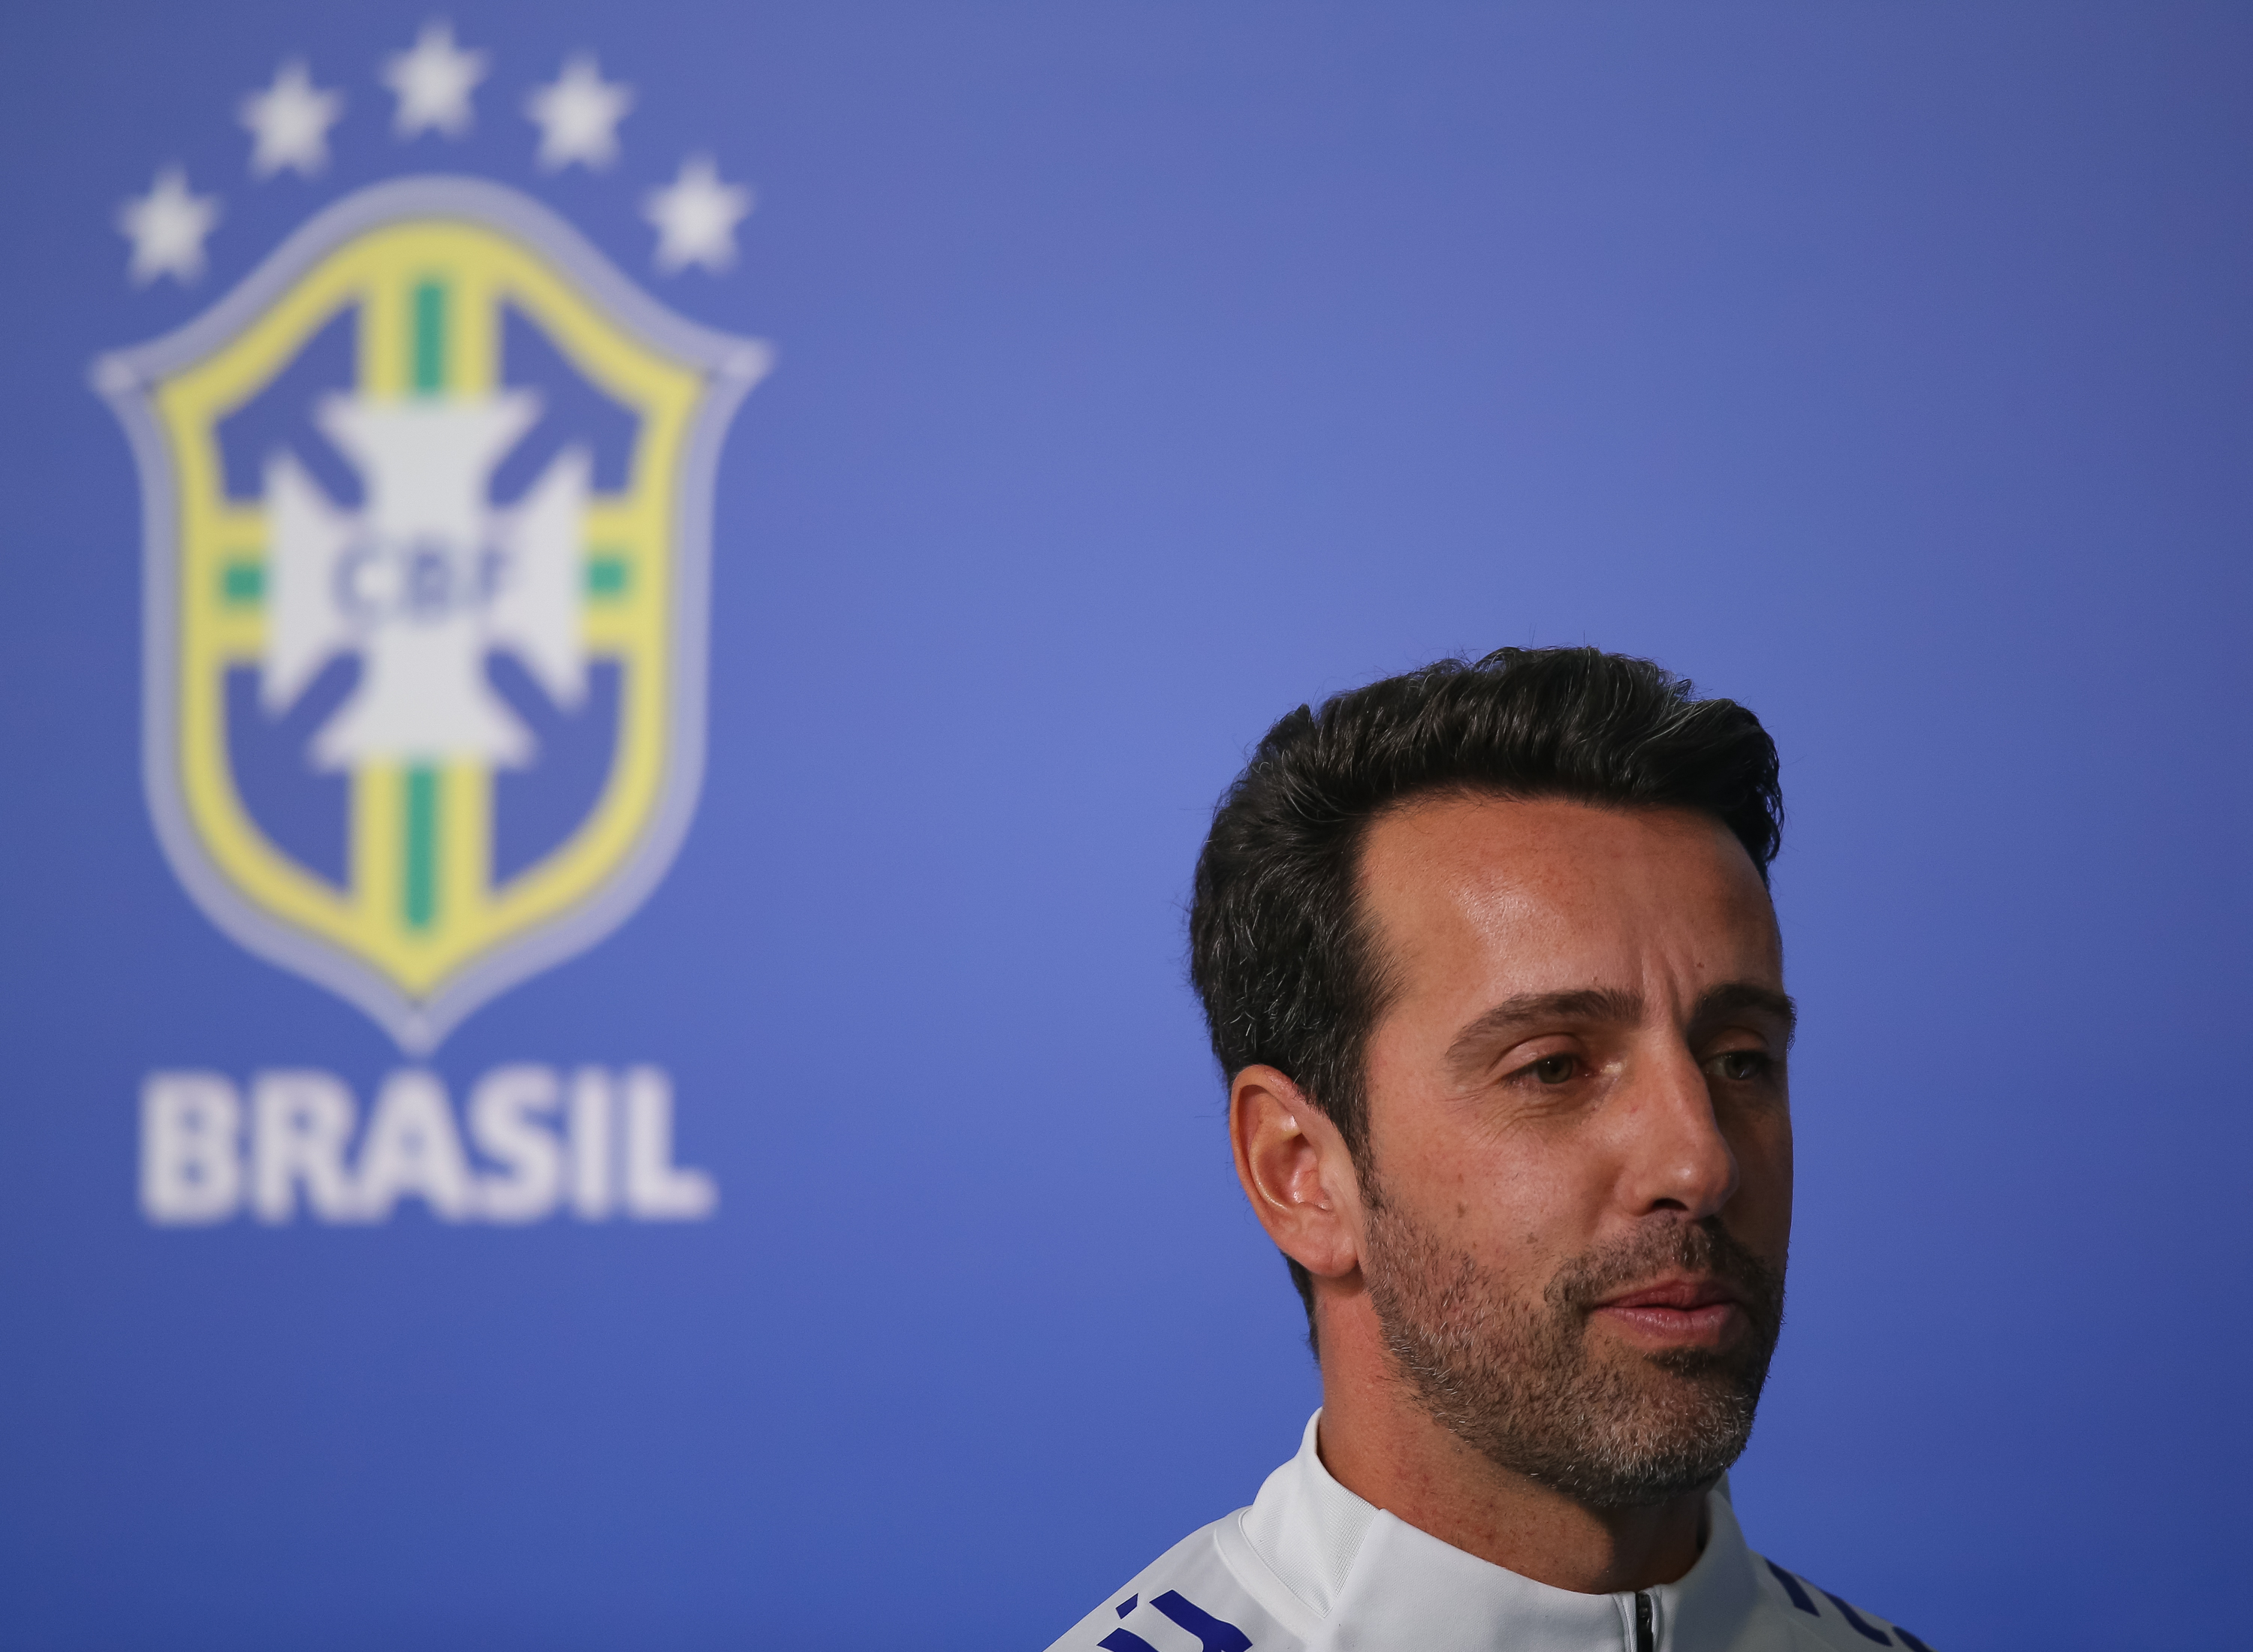 TERESOPOLIS, BRAZIL - MAY 21: The General Coordinator of the Brazilian national football team, Edu Gaspar, attends a press conference at Granja Comary Training Center for the first phase of preparation for the 2018 FIFA World Cup Russia on May 21, 2018 in Teresopolis, Brazil. (Photo by Buda Mendes/Getty Images)